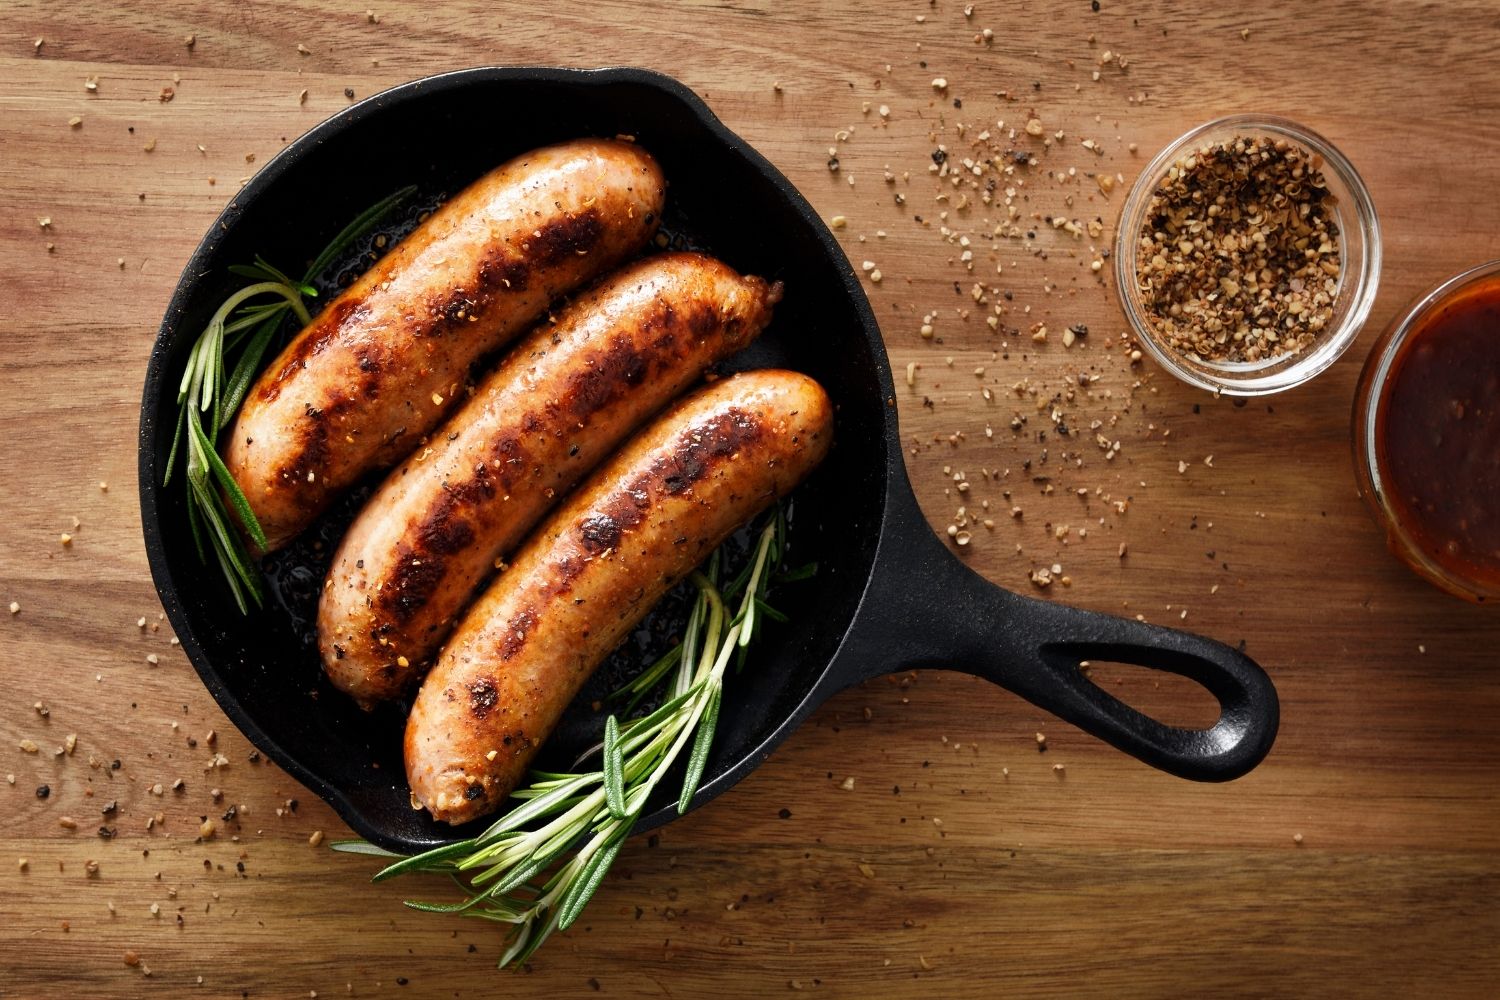 How long does sausage last in the fridge?